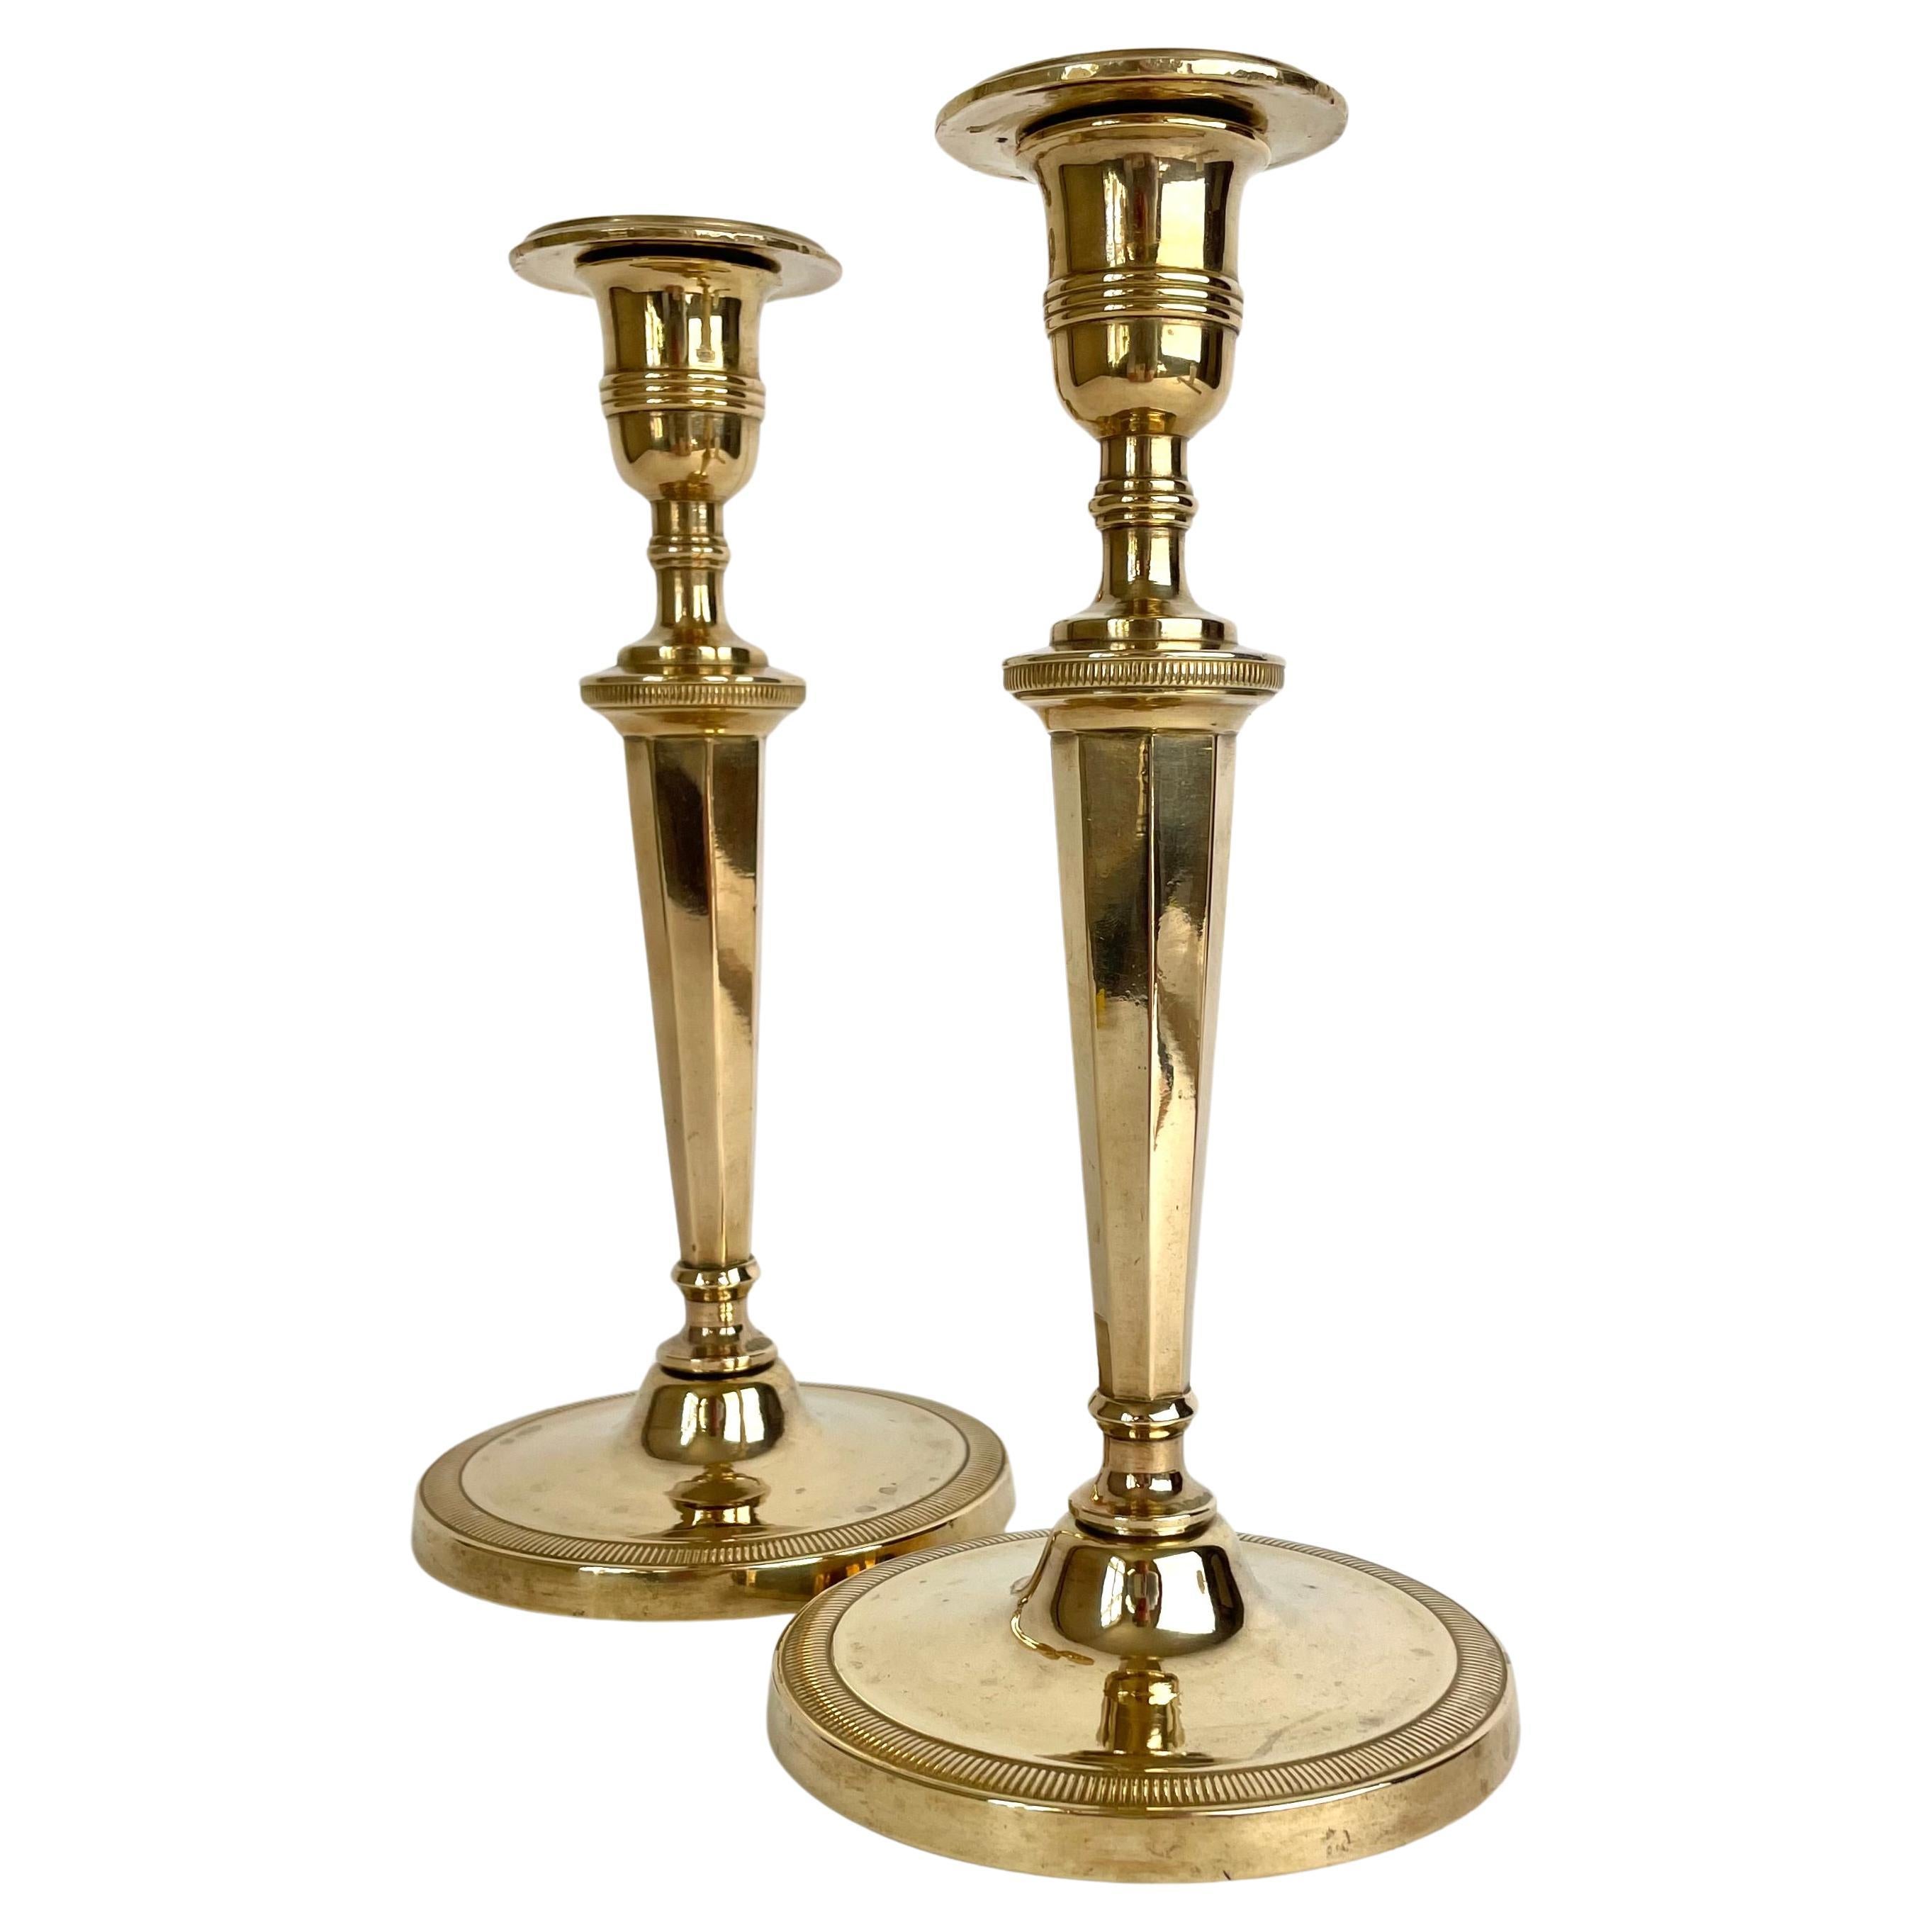 1790s Candle Holders